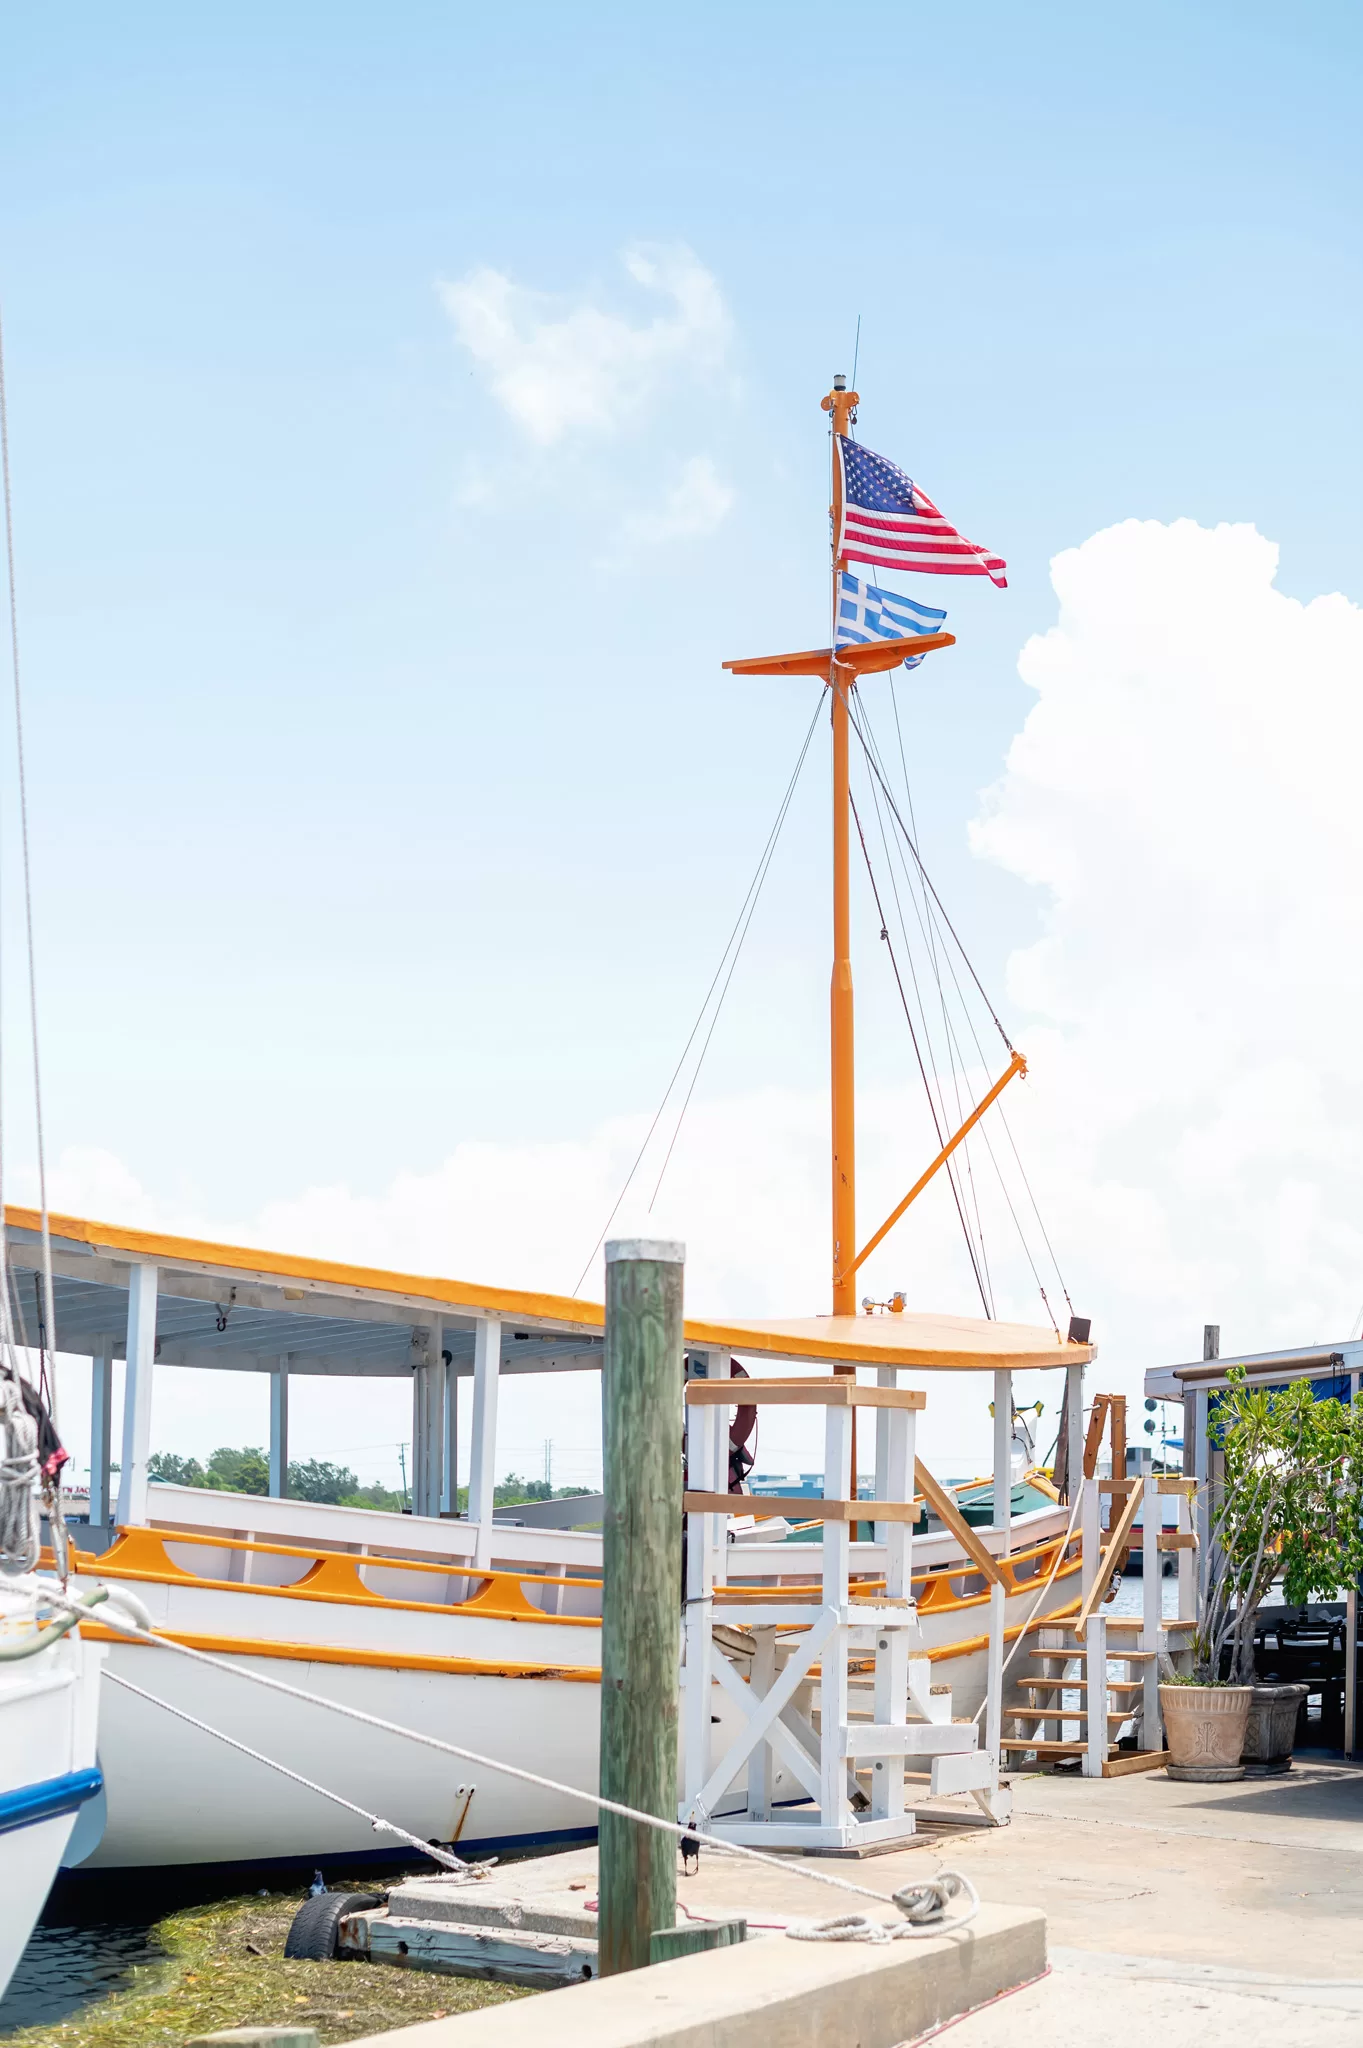 This image is for a blog post about Tarpon Springs Florida and shows a greek sponge boat moored downtown.